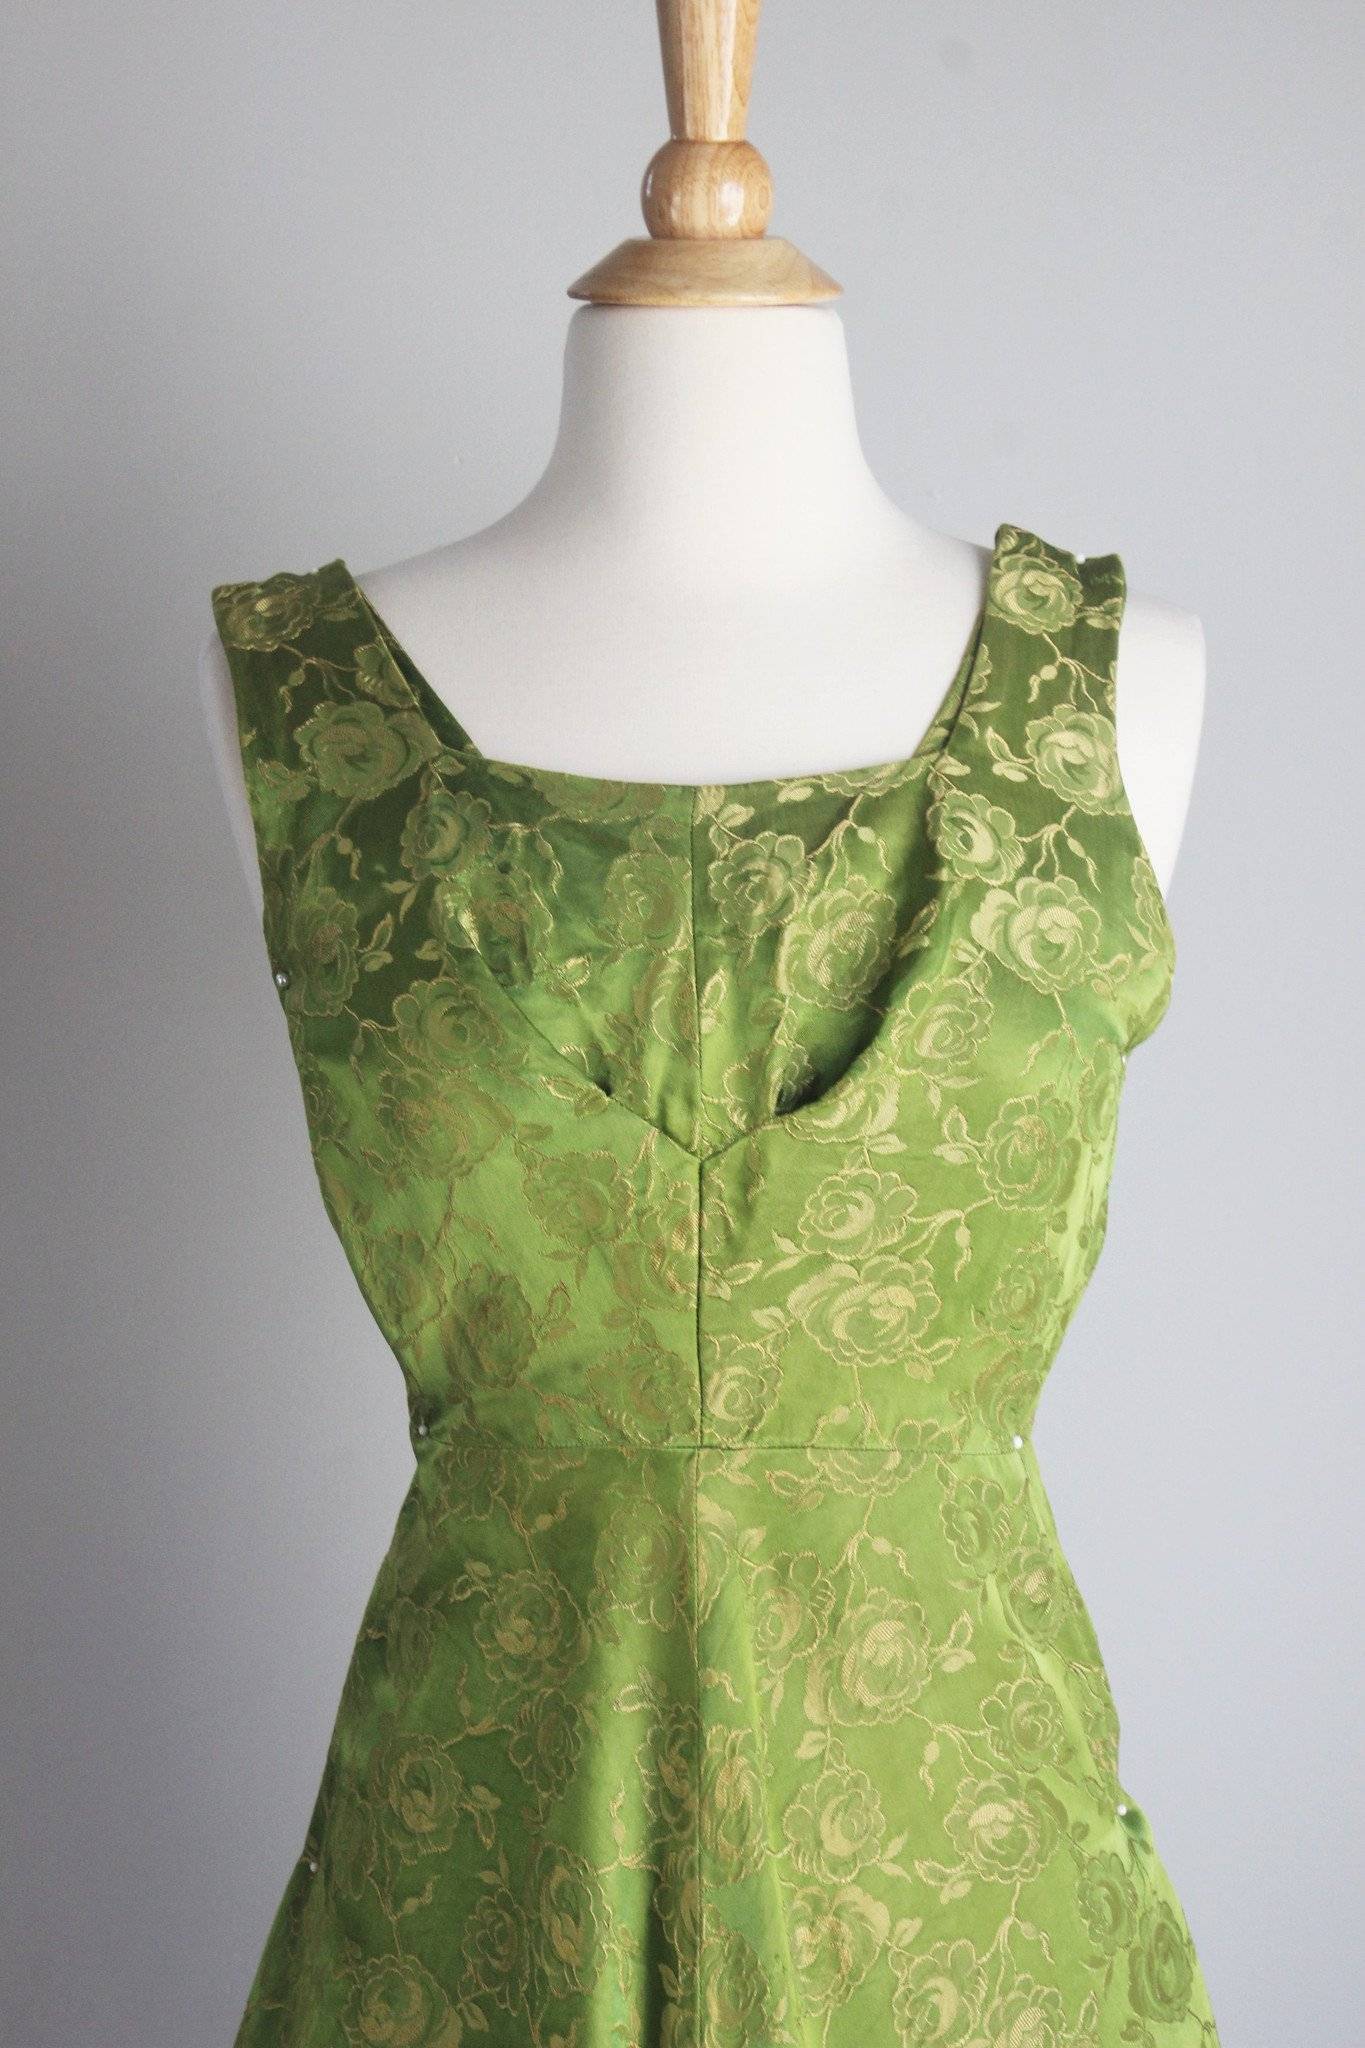 Vintage 1940s Green Damask Fit and Flare Party Dress-Toadstool Farm Vintage-coktaail,Dress,extra small,extra small petite,fit and flare,full skirt,green damask,new look,new look circle,Vintage,Vintage Clothing